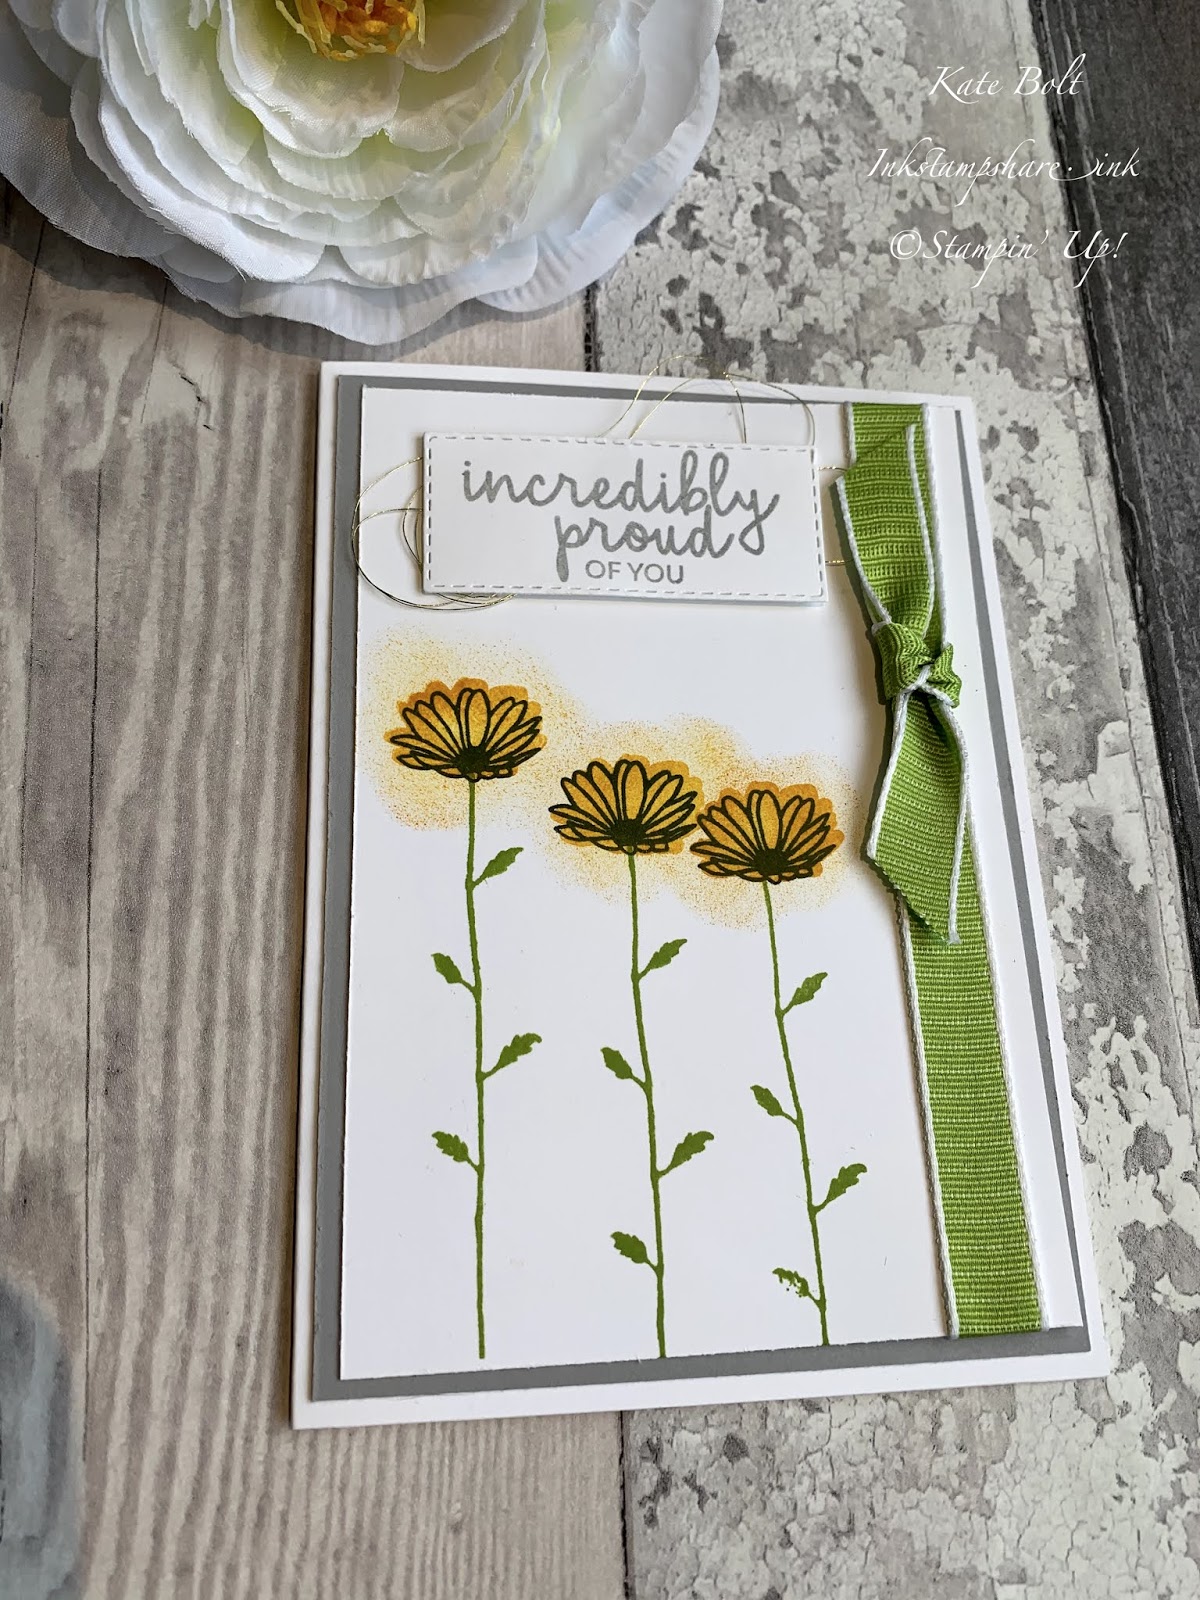 Daisy Delight, Daisy card.Incredibly Proud Of You. Kylie Bertucci's International Blog Highlights